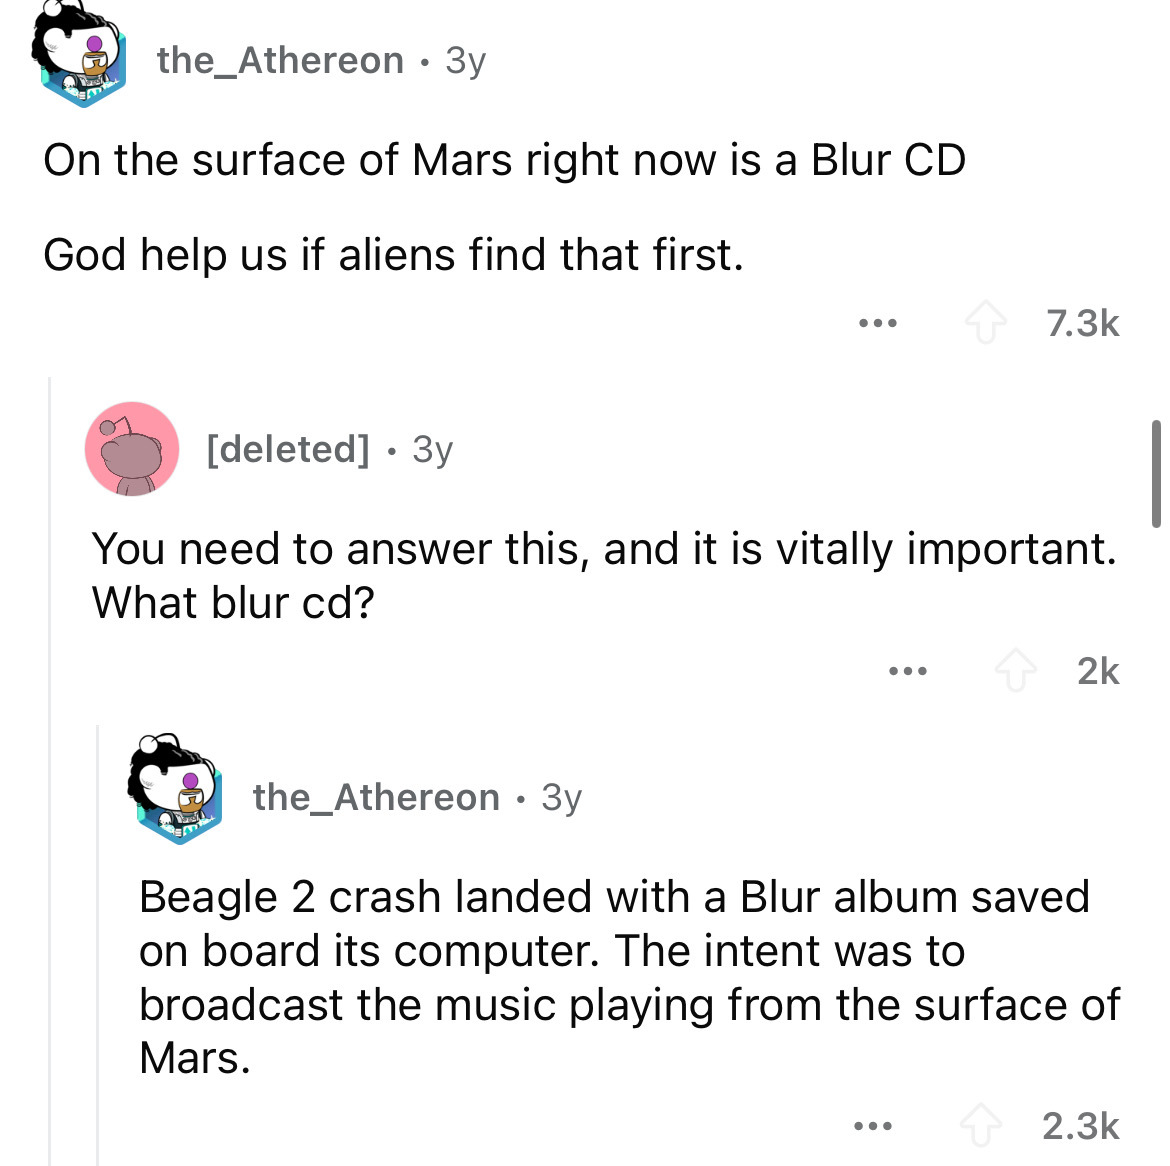 screenshot - the_Athereon 3y On the surface of Mars right now is a Blur Cd God help us if aliens find that first. ... deleted 3y You need to answer this, and it is vitally important. What blur cd? the_Athereon 3y . ... 2k Beagle 2 crash landed with a Blur